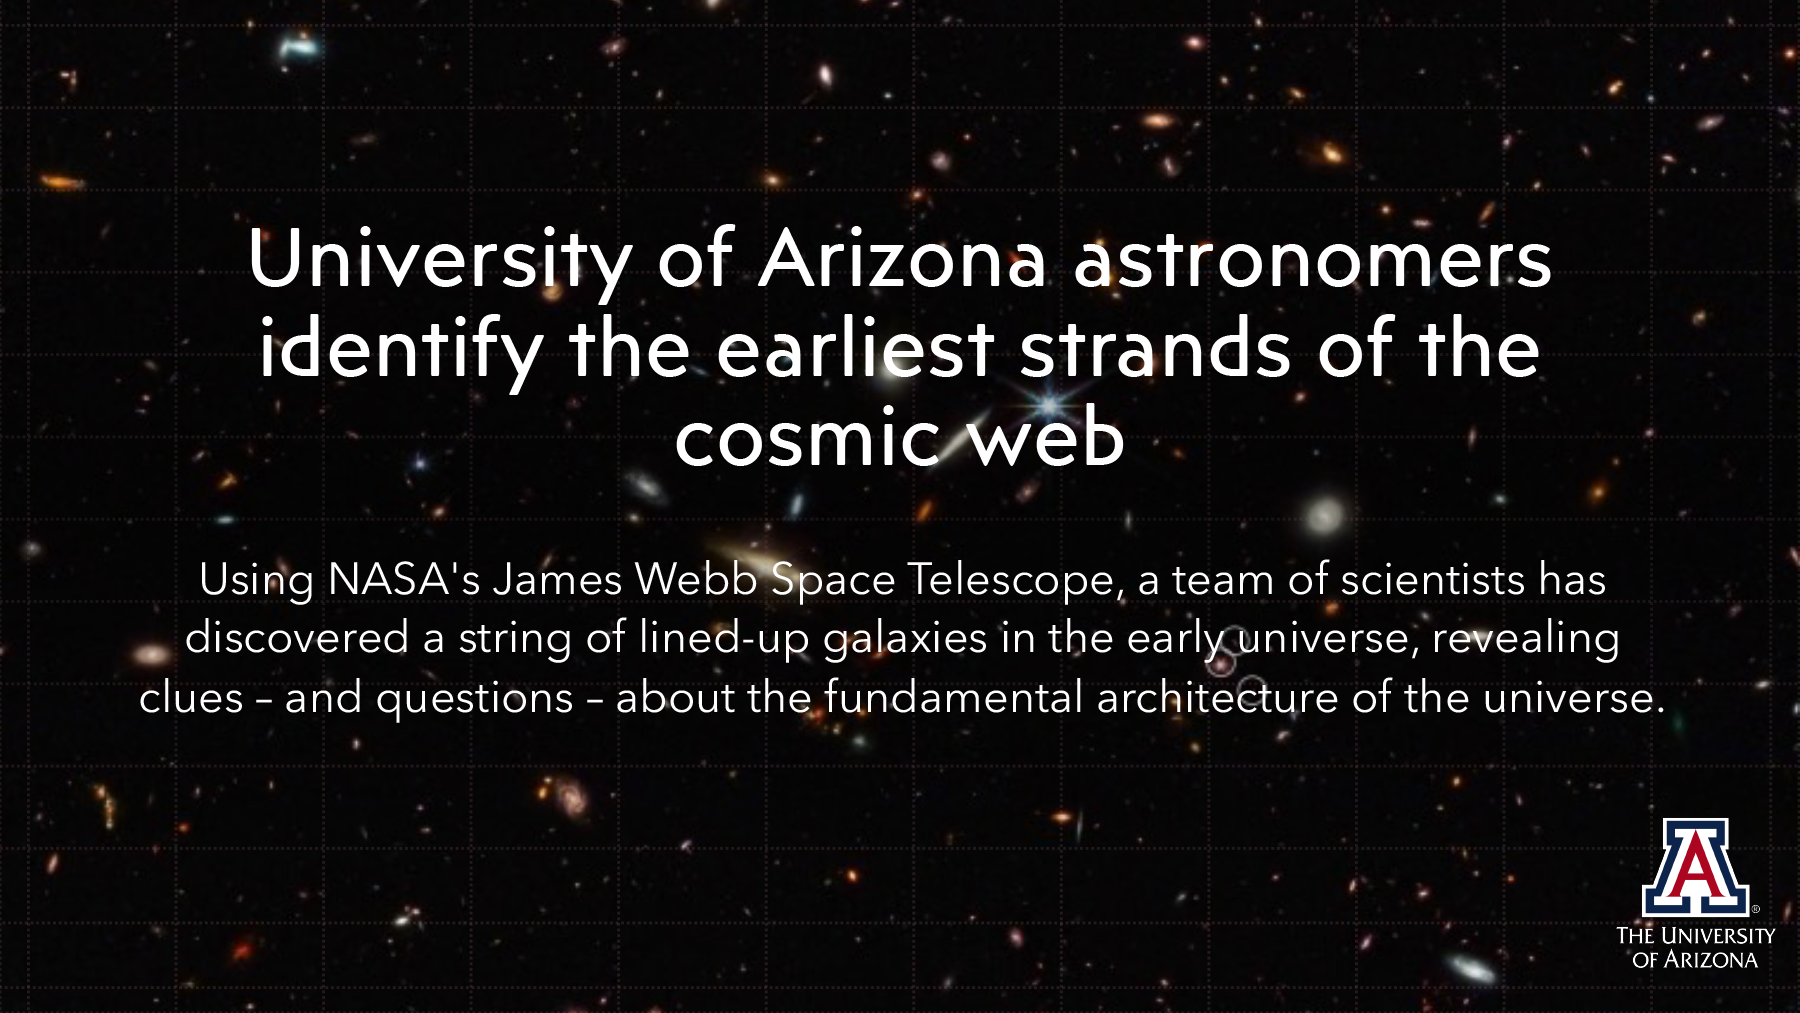 University of Arizona astronomers identify the earliest strands of the cosmic web